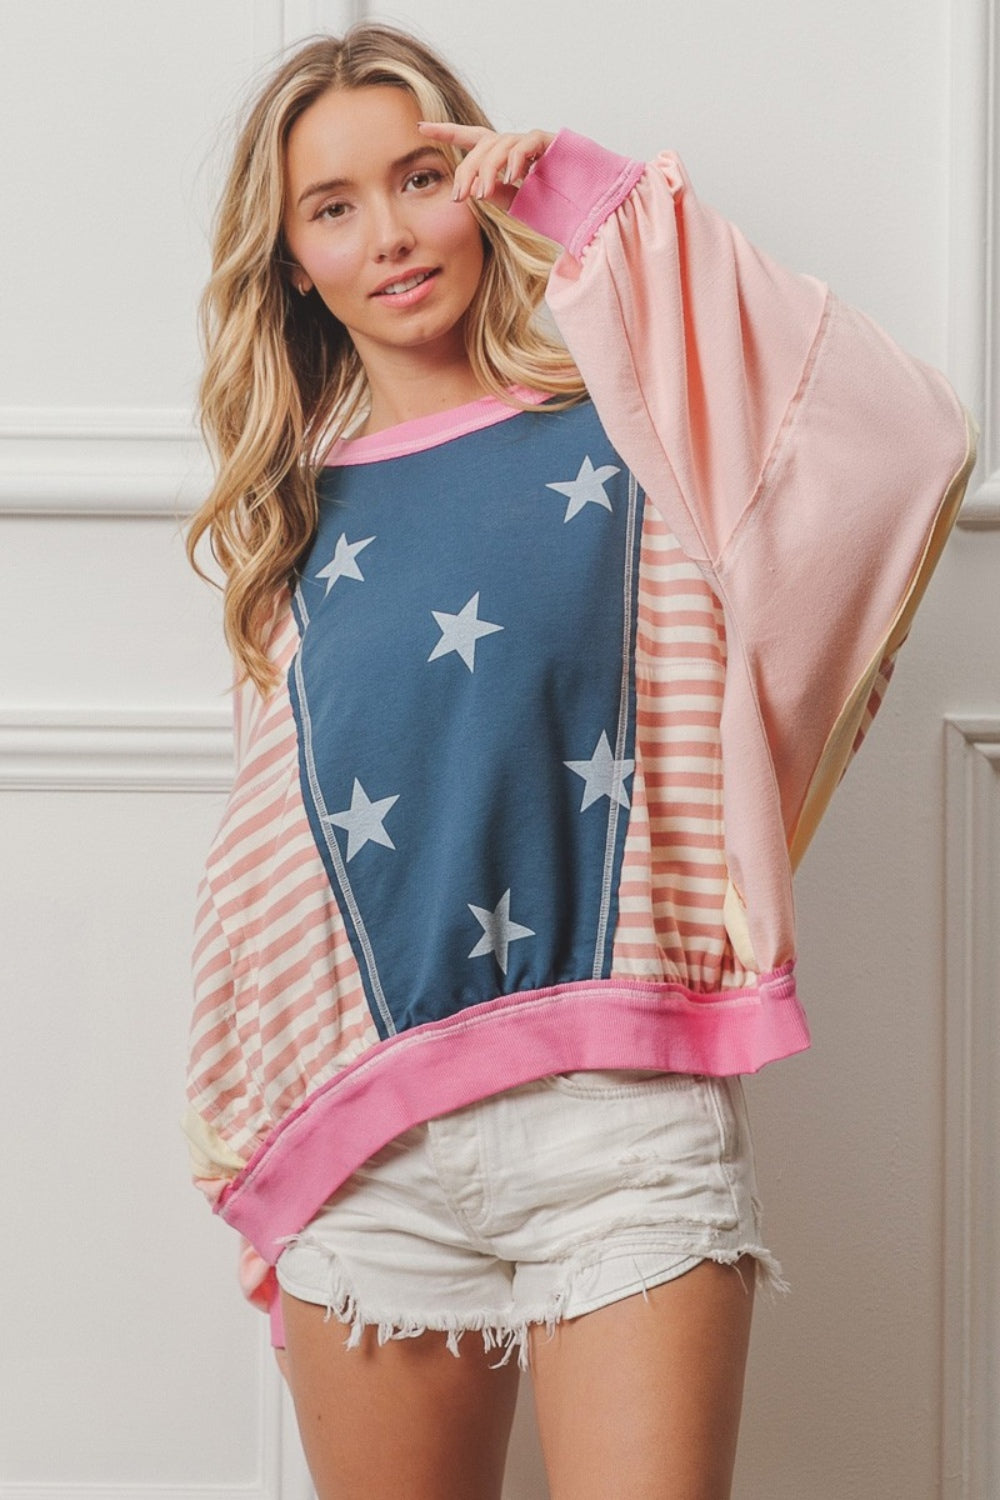 Stars by Night Stripes by Day Top